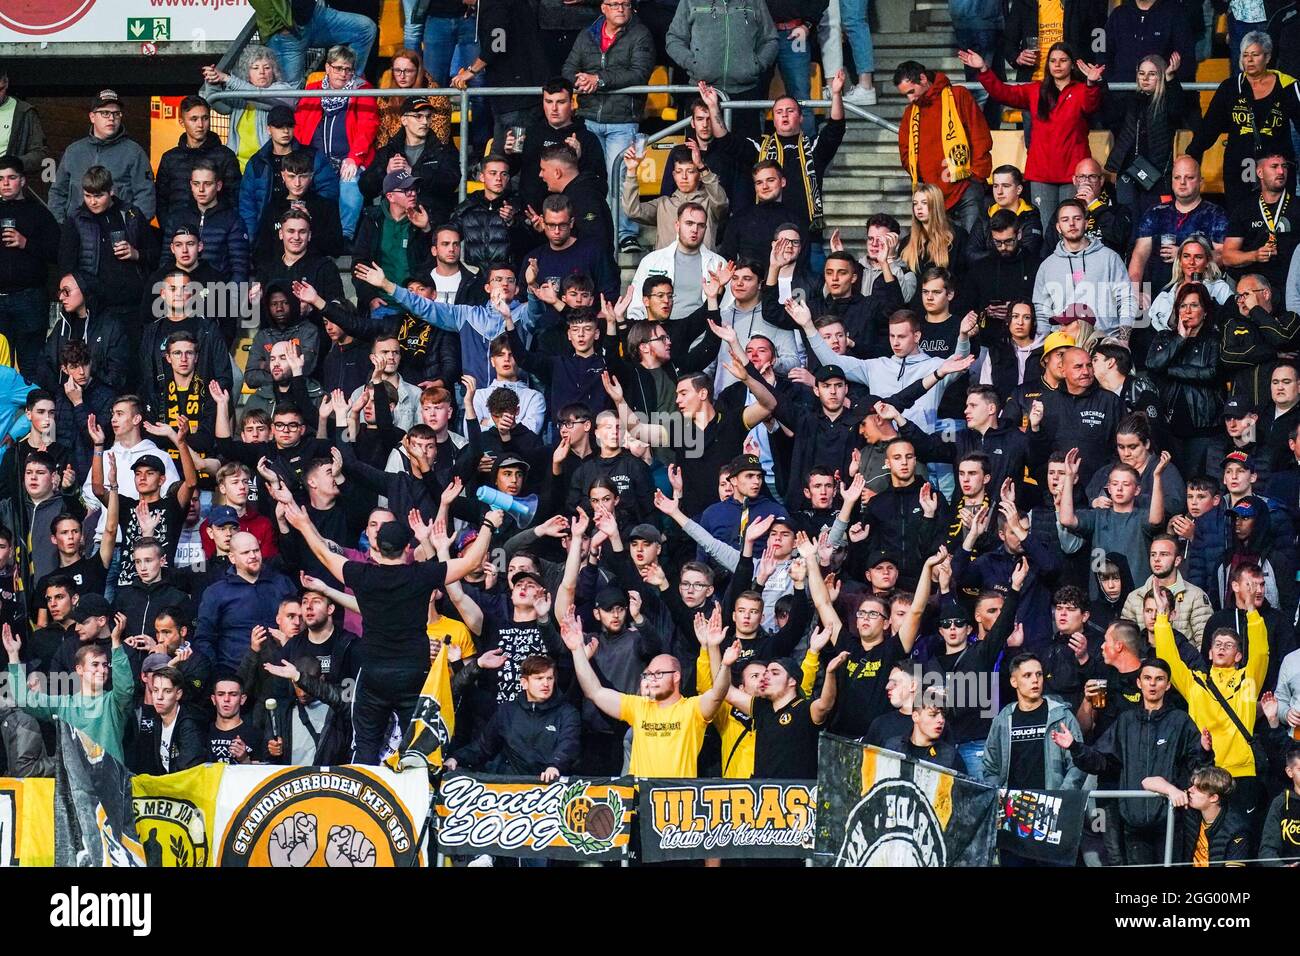 KERKRADE, NETHERLANDS - AUGUST 27: Fans and supporters of Roda JC during  the Dutch Keukenkampioendivisie match between Roda JC and Almere City FC at  Parkstad Limburg Stadion on August 27, 2021 in